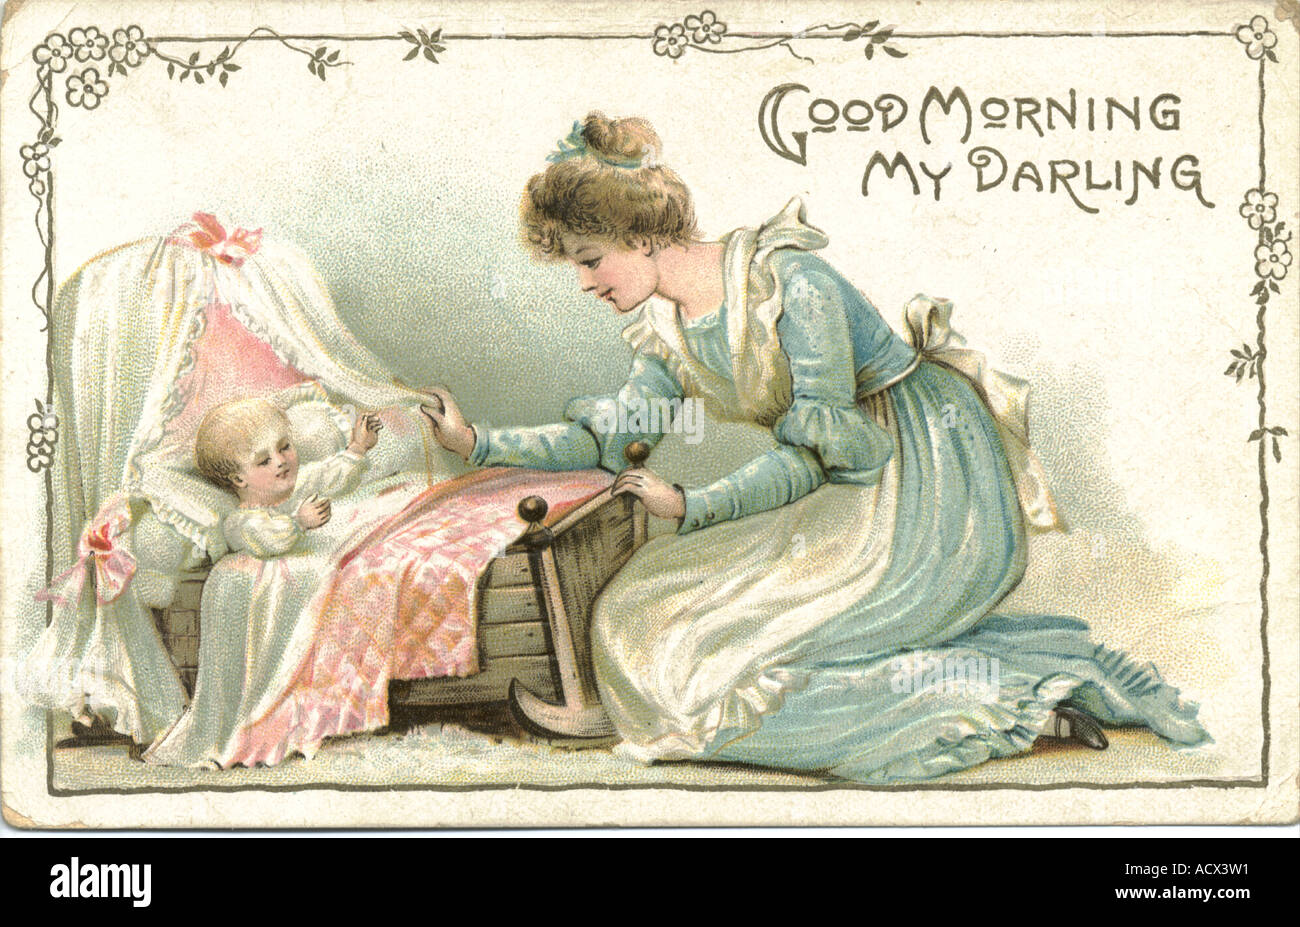 Greeting postcard of mother and baby circa 1903 titled Good Morning My Darling Stock Photo